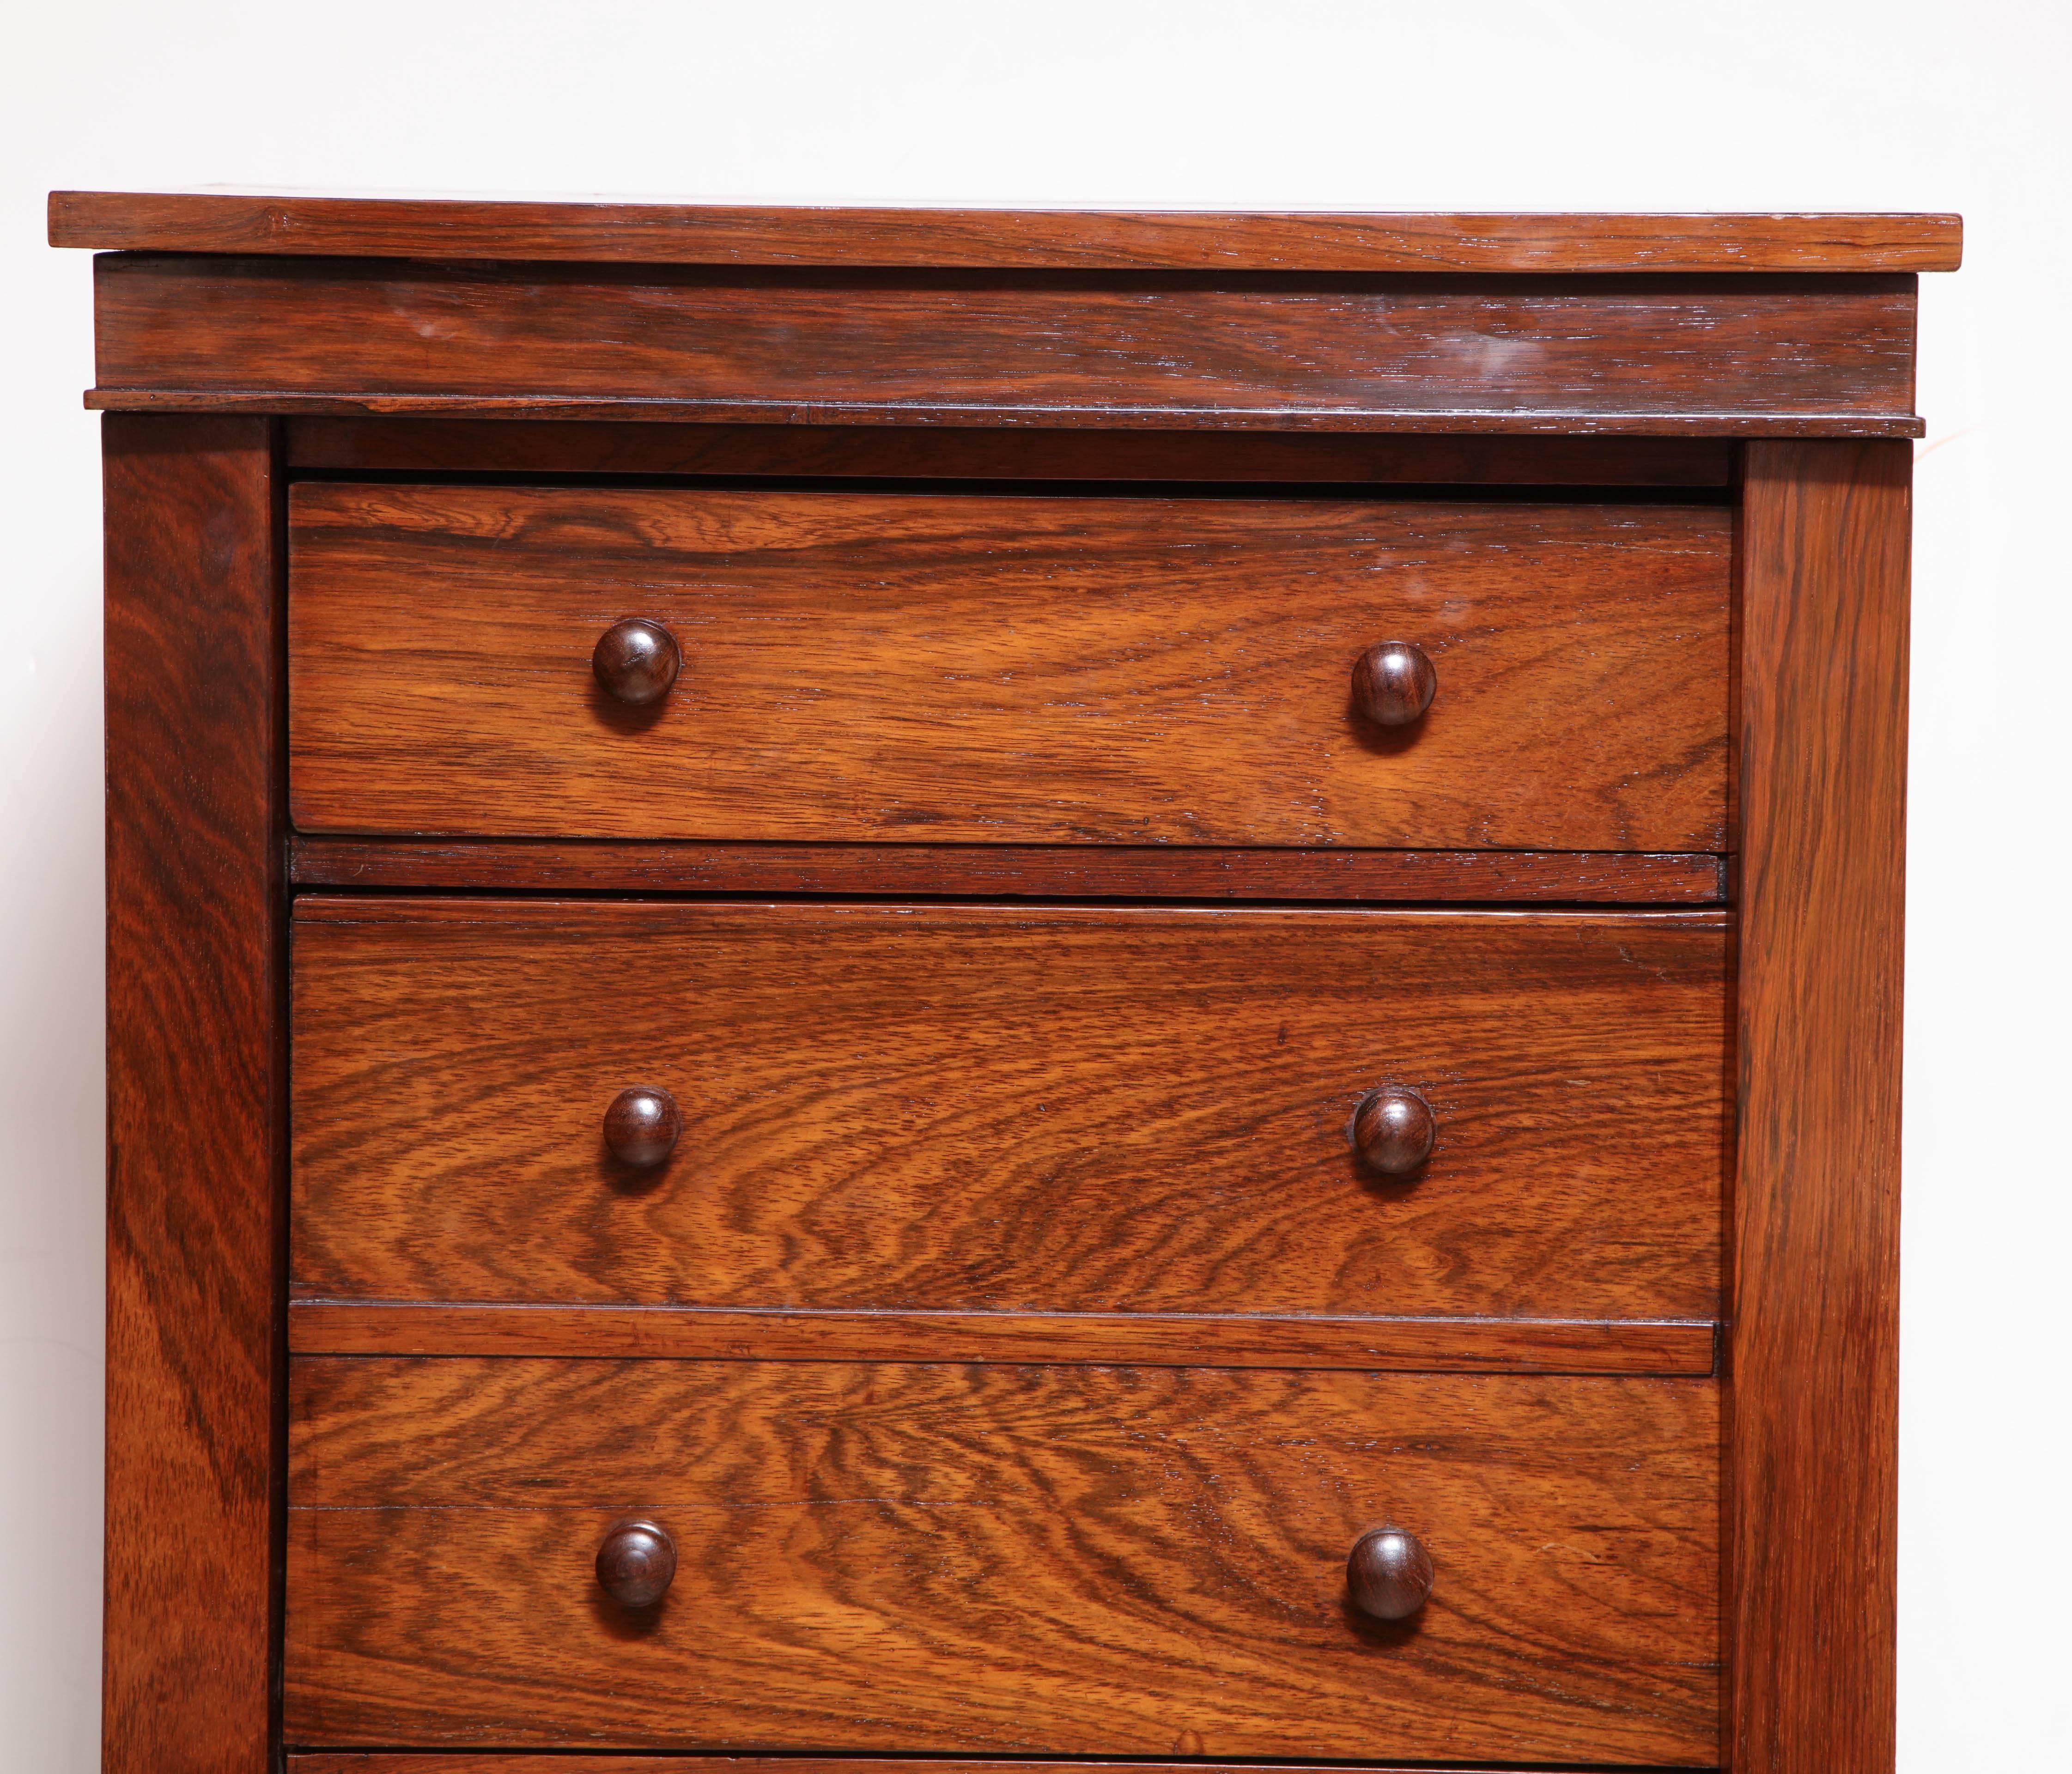 English Late Regency rosewood Wellington drop front desk with a fitted interior and a tooled leather writing surface.